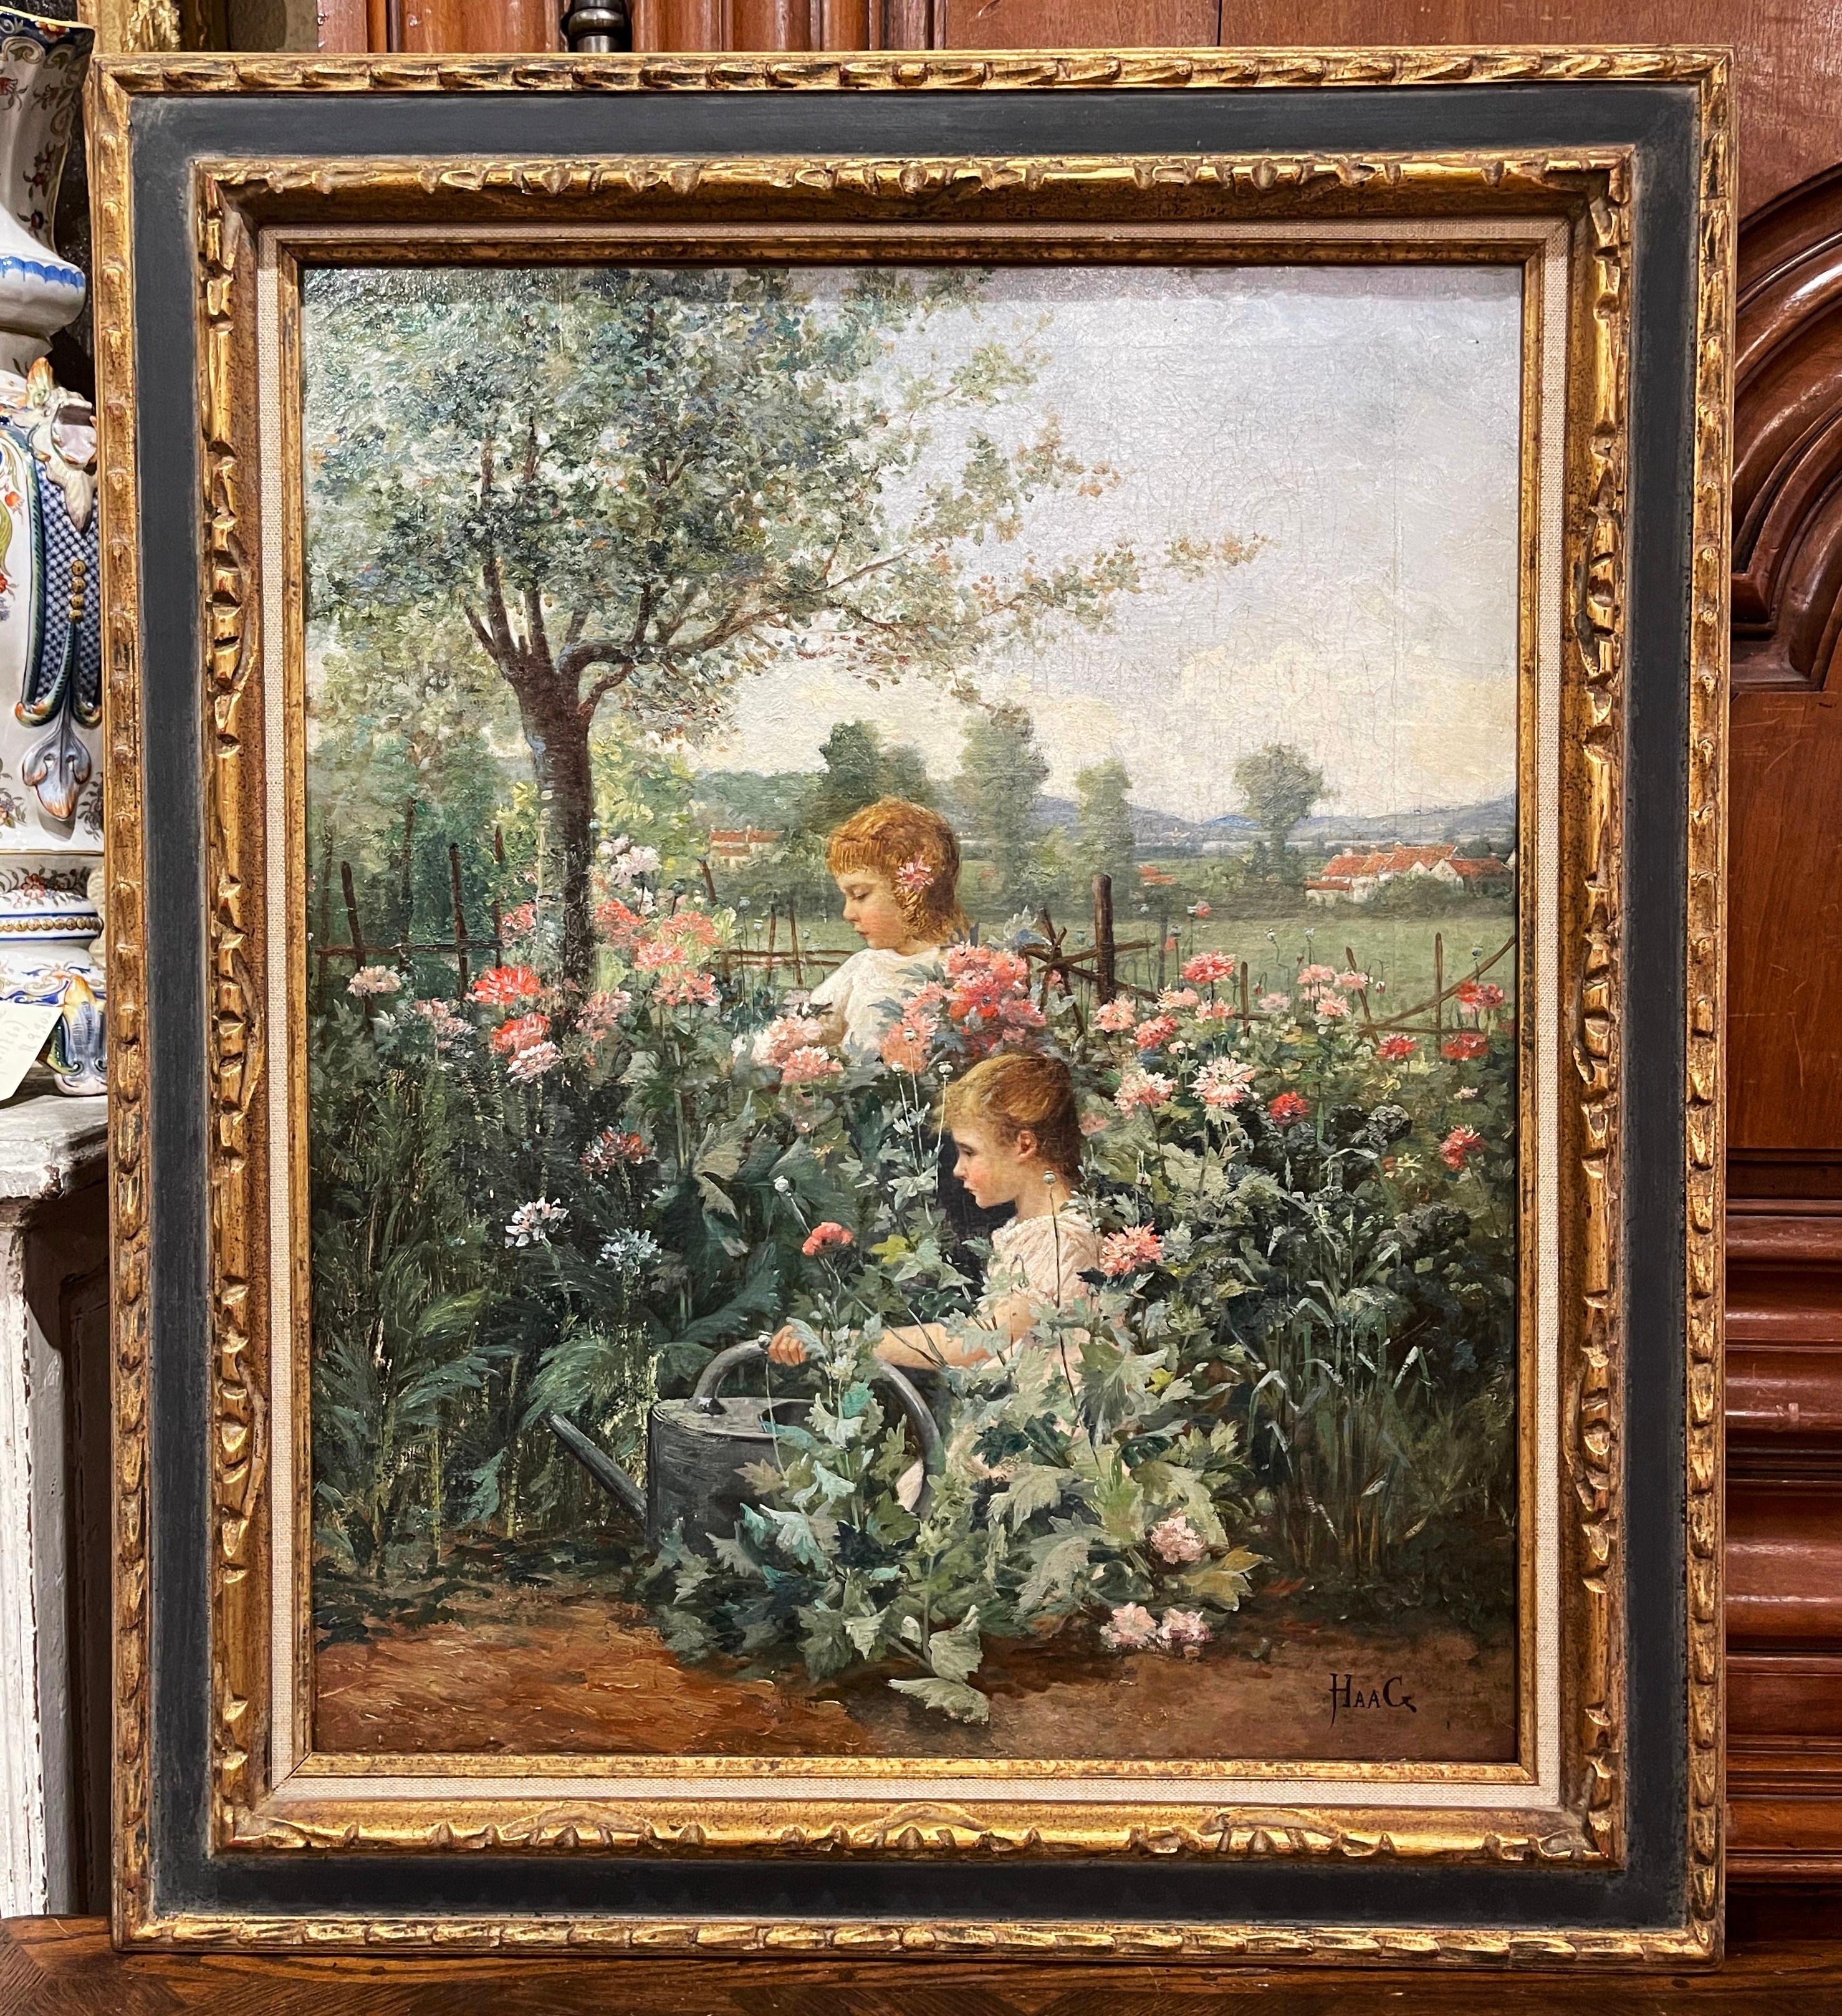 19th Century French Oil on Canvas Painting in Carved Frame Signed Haag 1